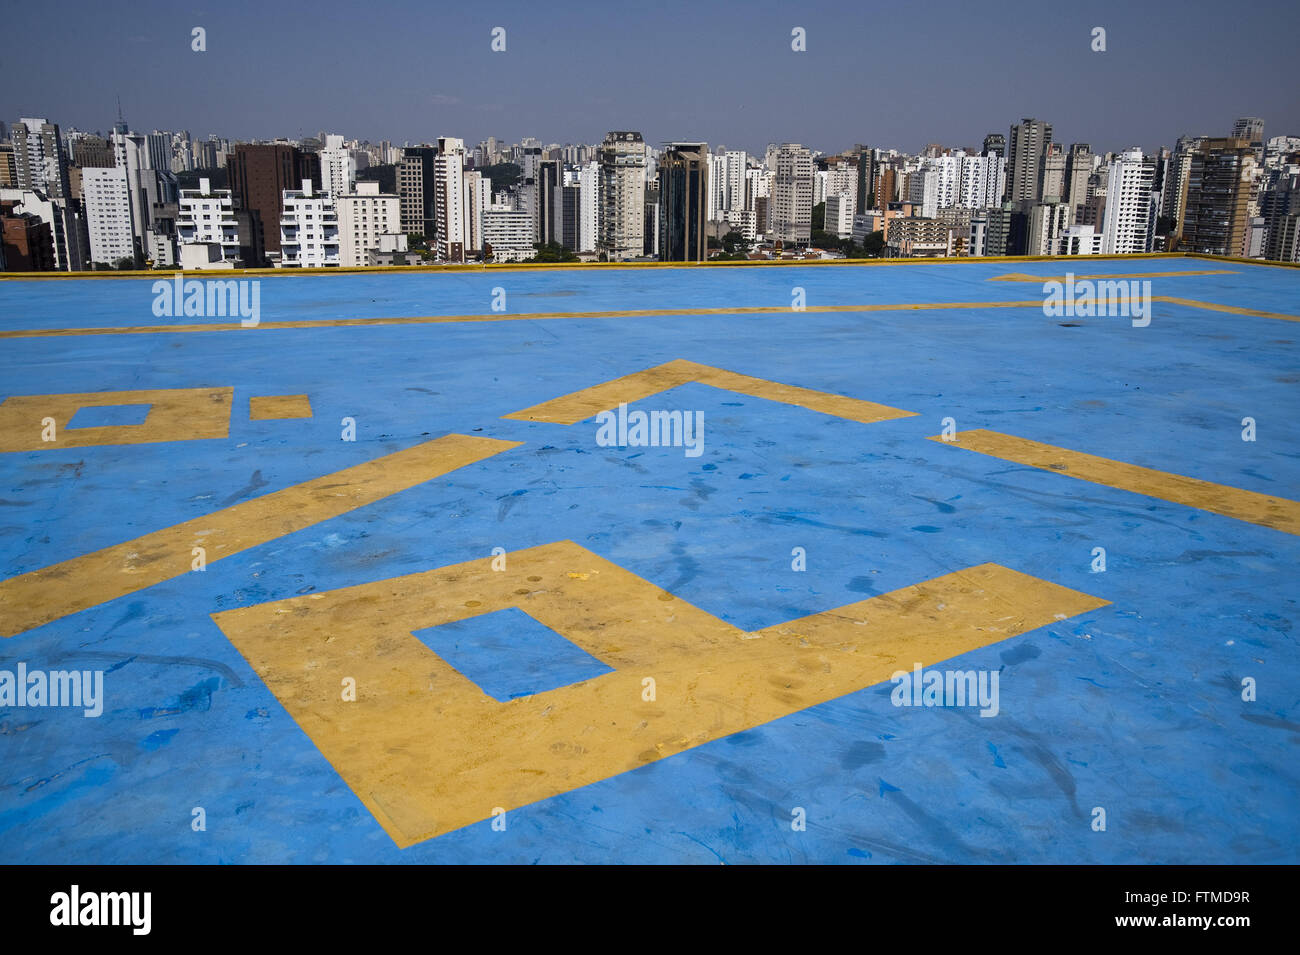 Helipad on roof of building in the region of Paulista Avenue Stock Photo